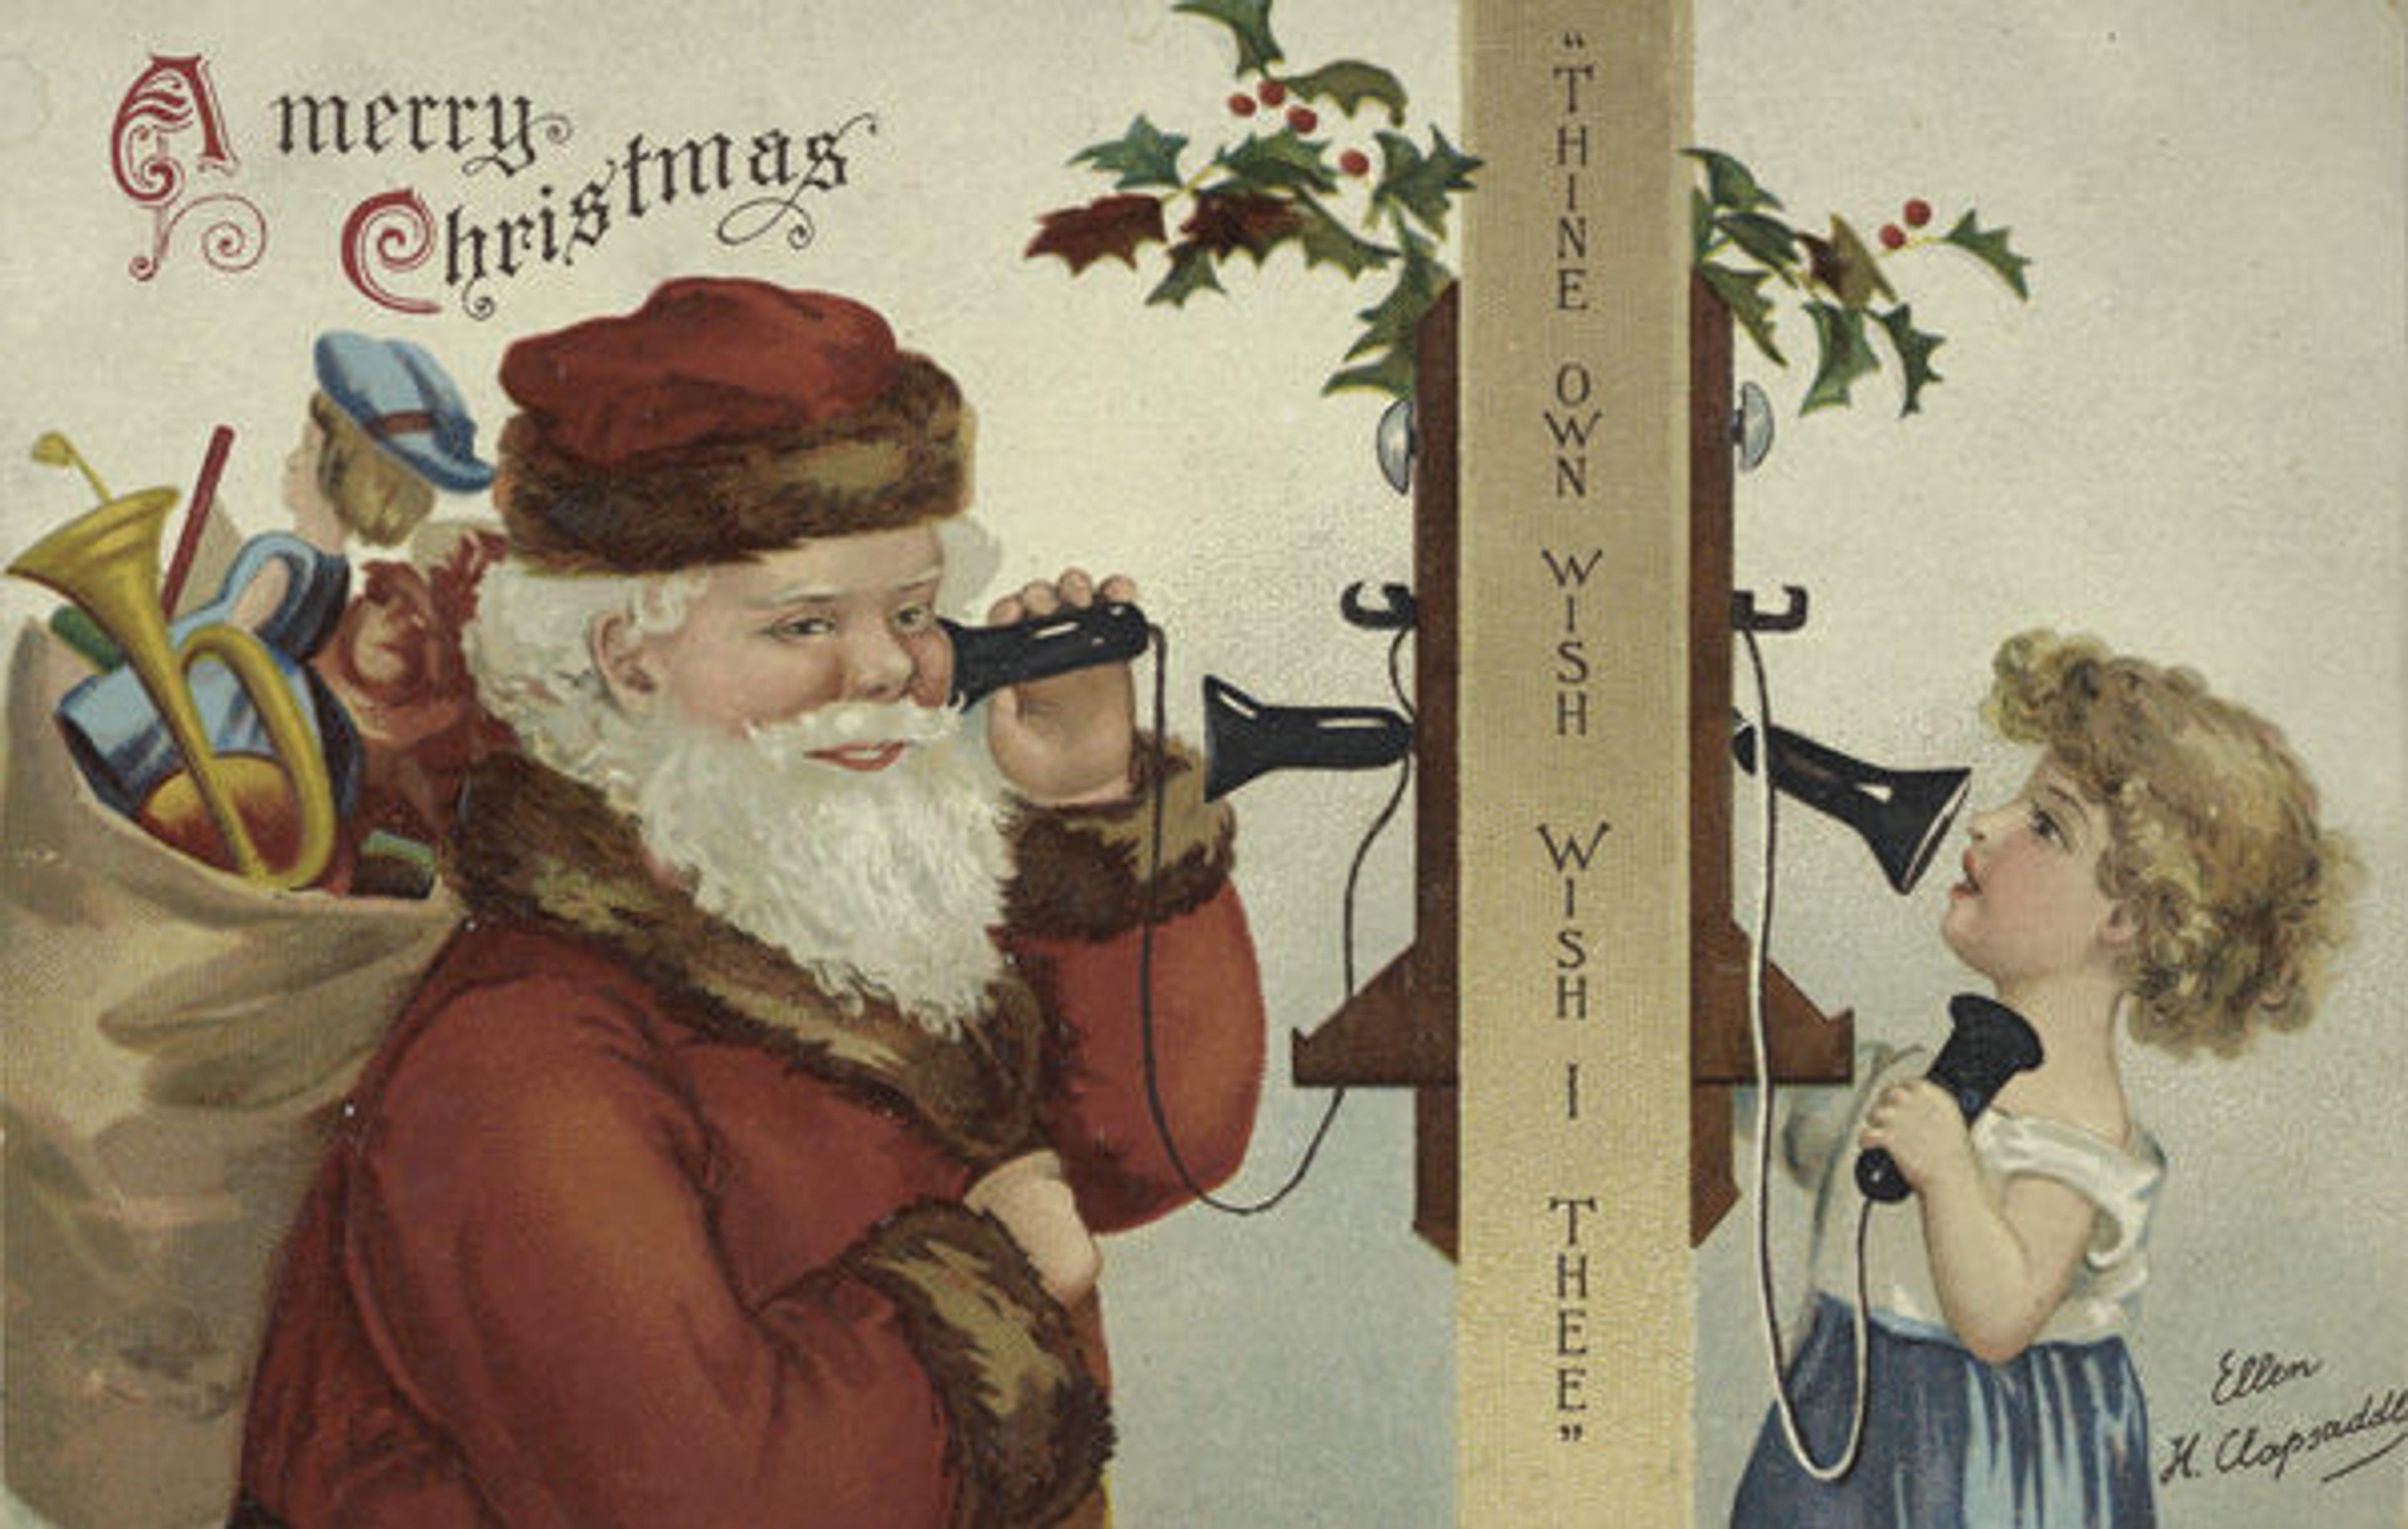 A Merry Christmas, early 20th century